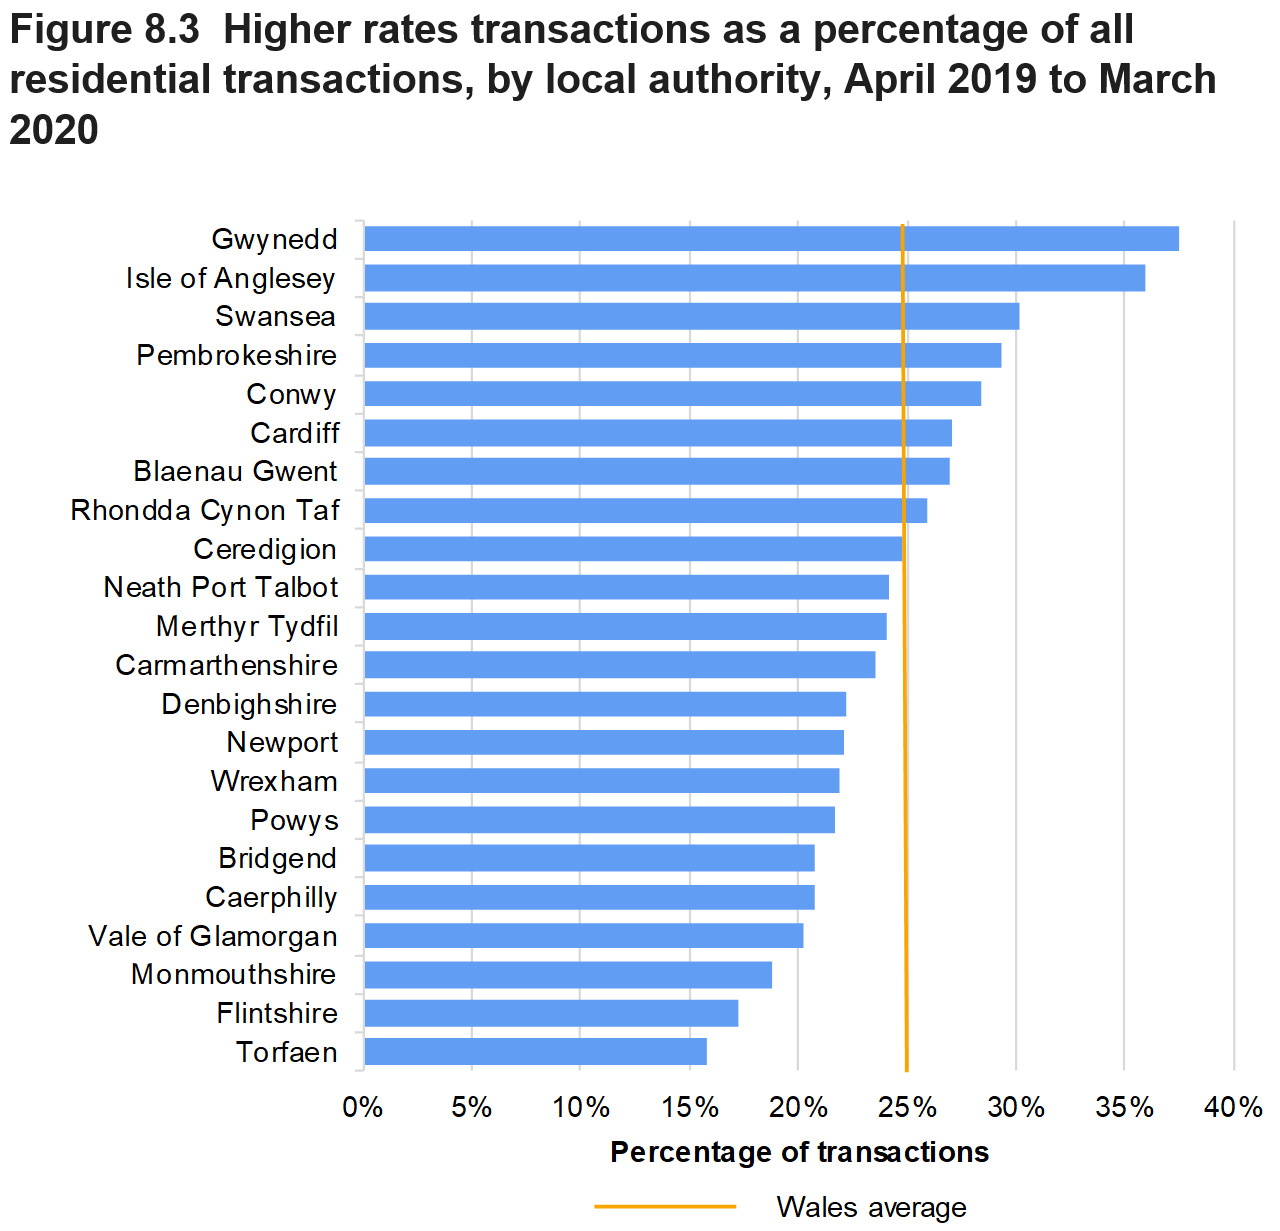 Figure 8.3 shows higher rate transactions as a percentage of all residential transactions, for all local authorities and a Wales average, April 2019 to March 2020.